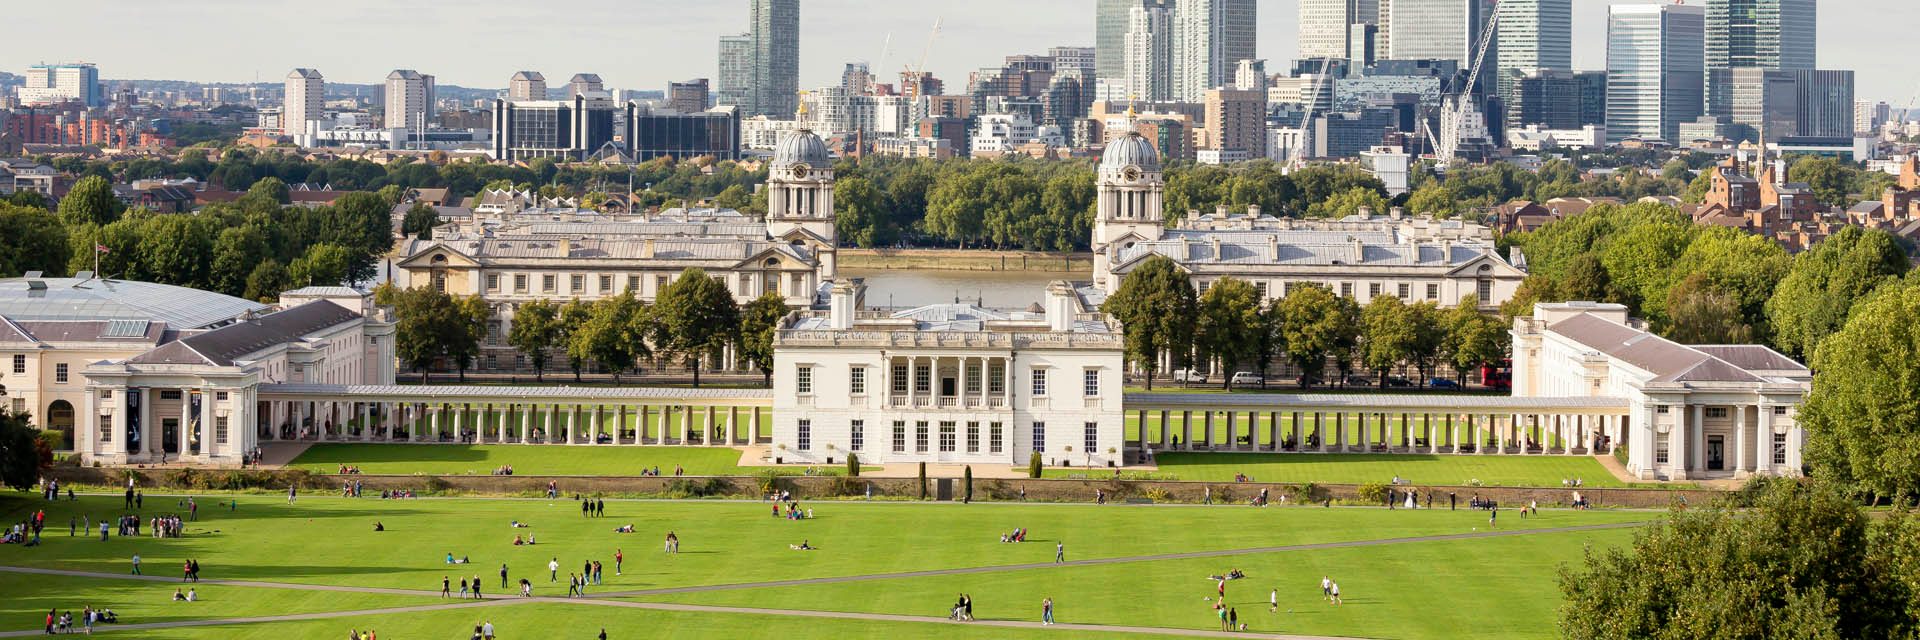 Greenwich, one of the best parks in London